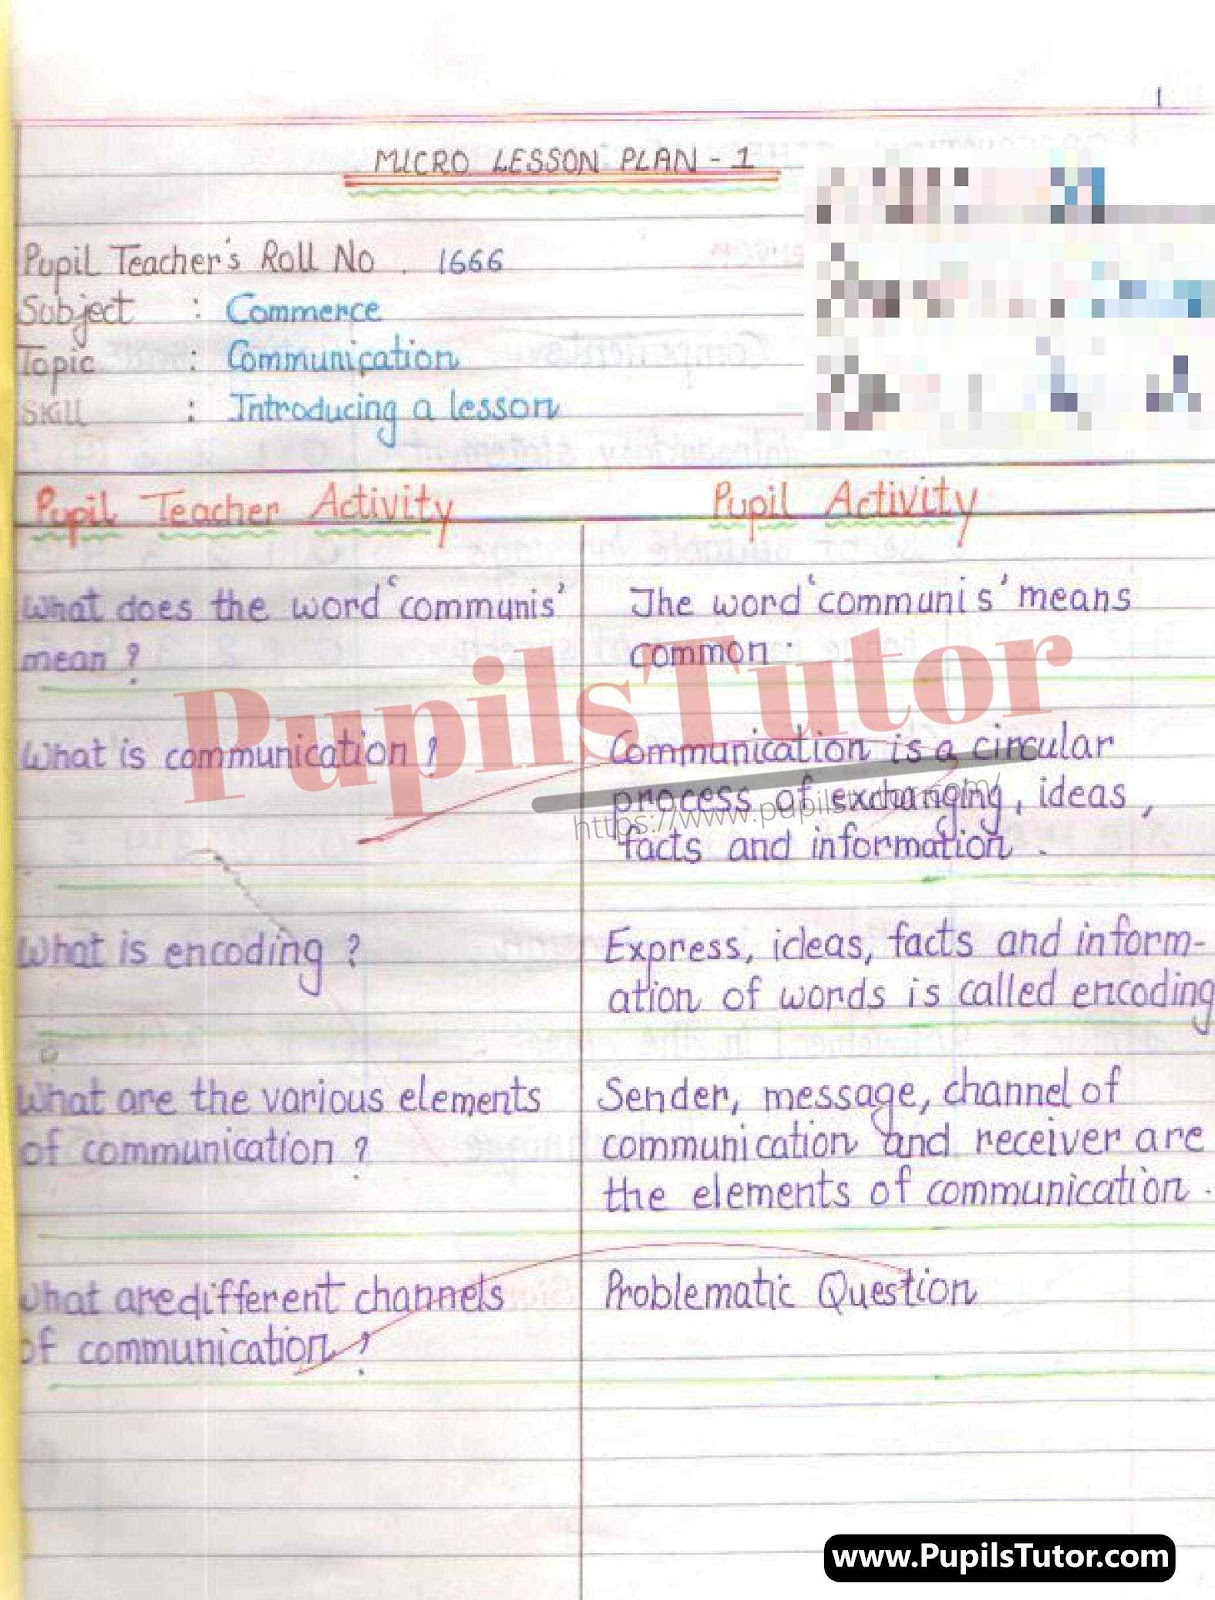 Communication And Its Elements Lesson Plan – (Page And Image Number 1) – Pupils Tutor